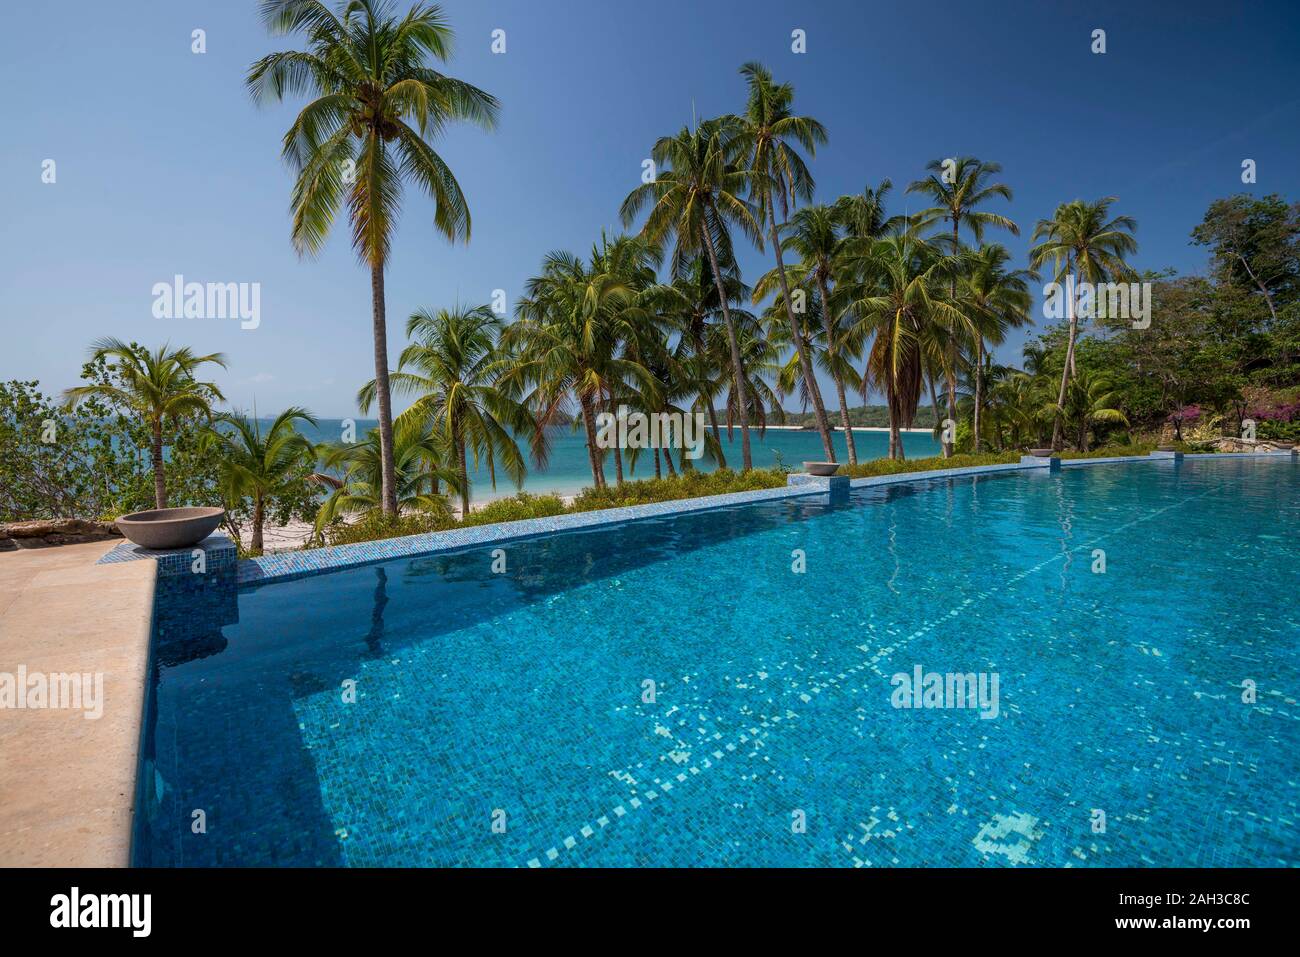 An infinity pool among palms on the beach over the Pacific Ocean, Las Perlas archipelago, Panamá, Central America Stock Photo